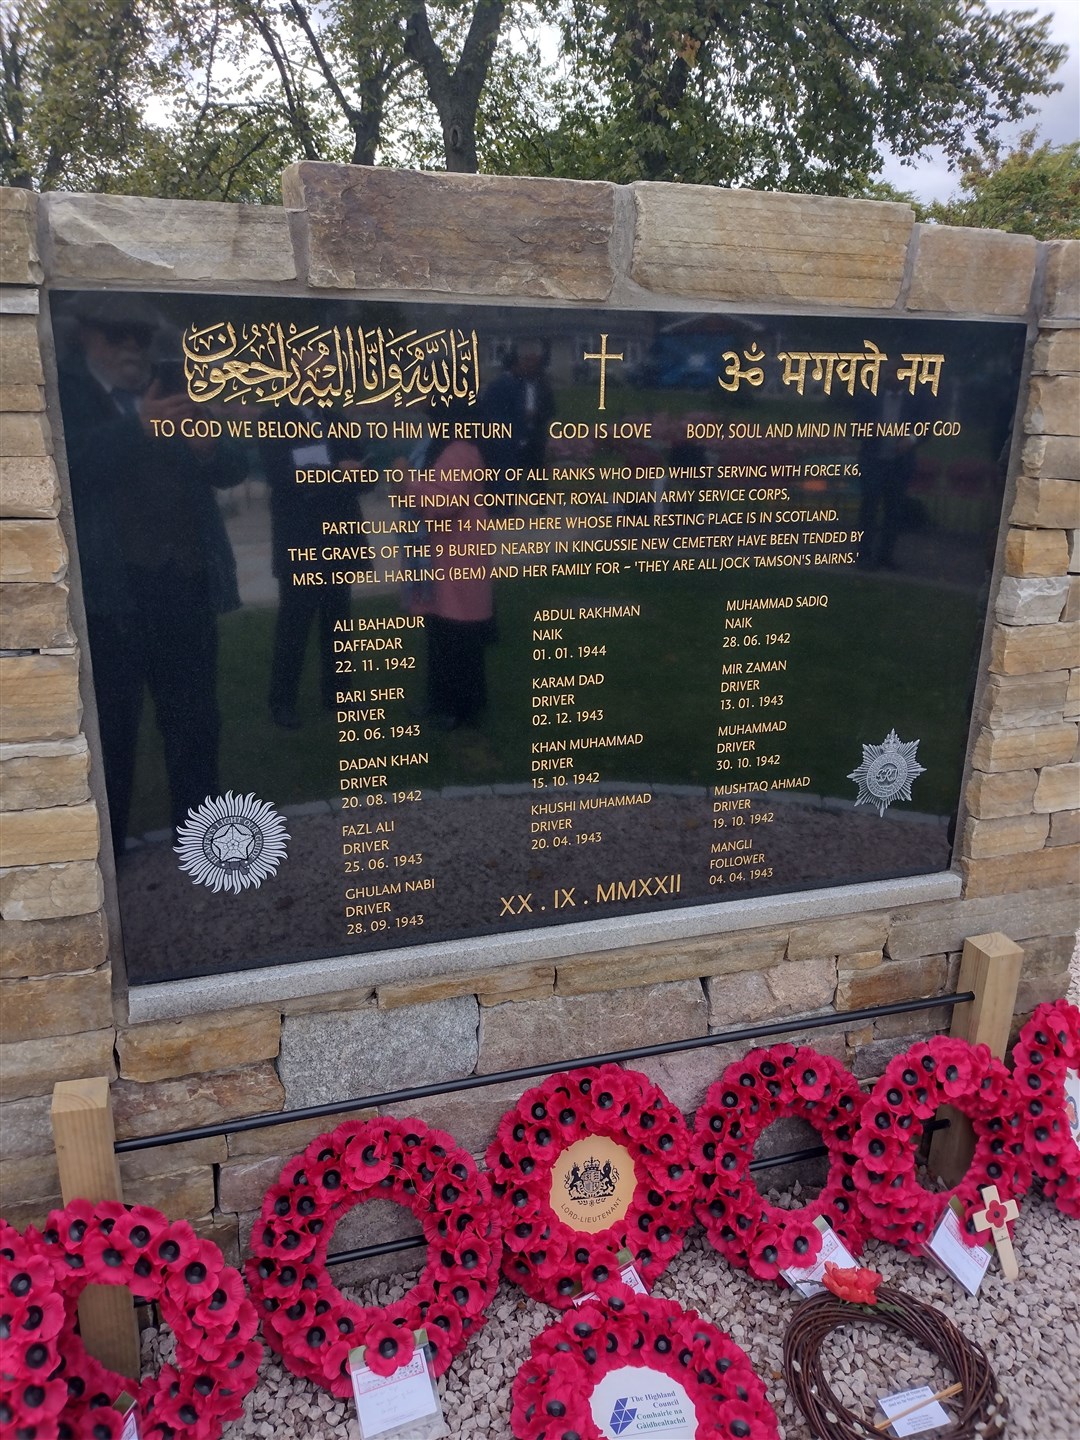 We will remember...the memorial plaque unveiled today